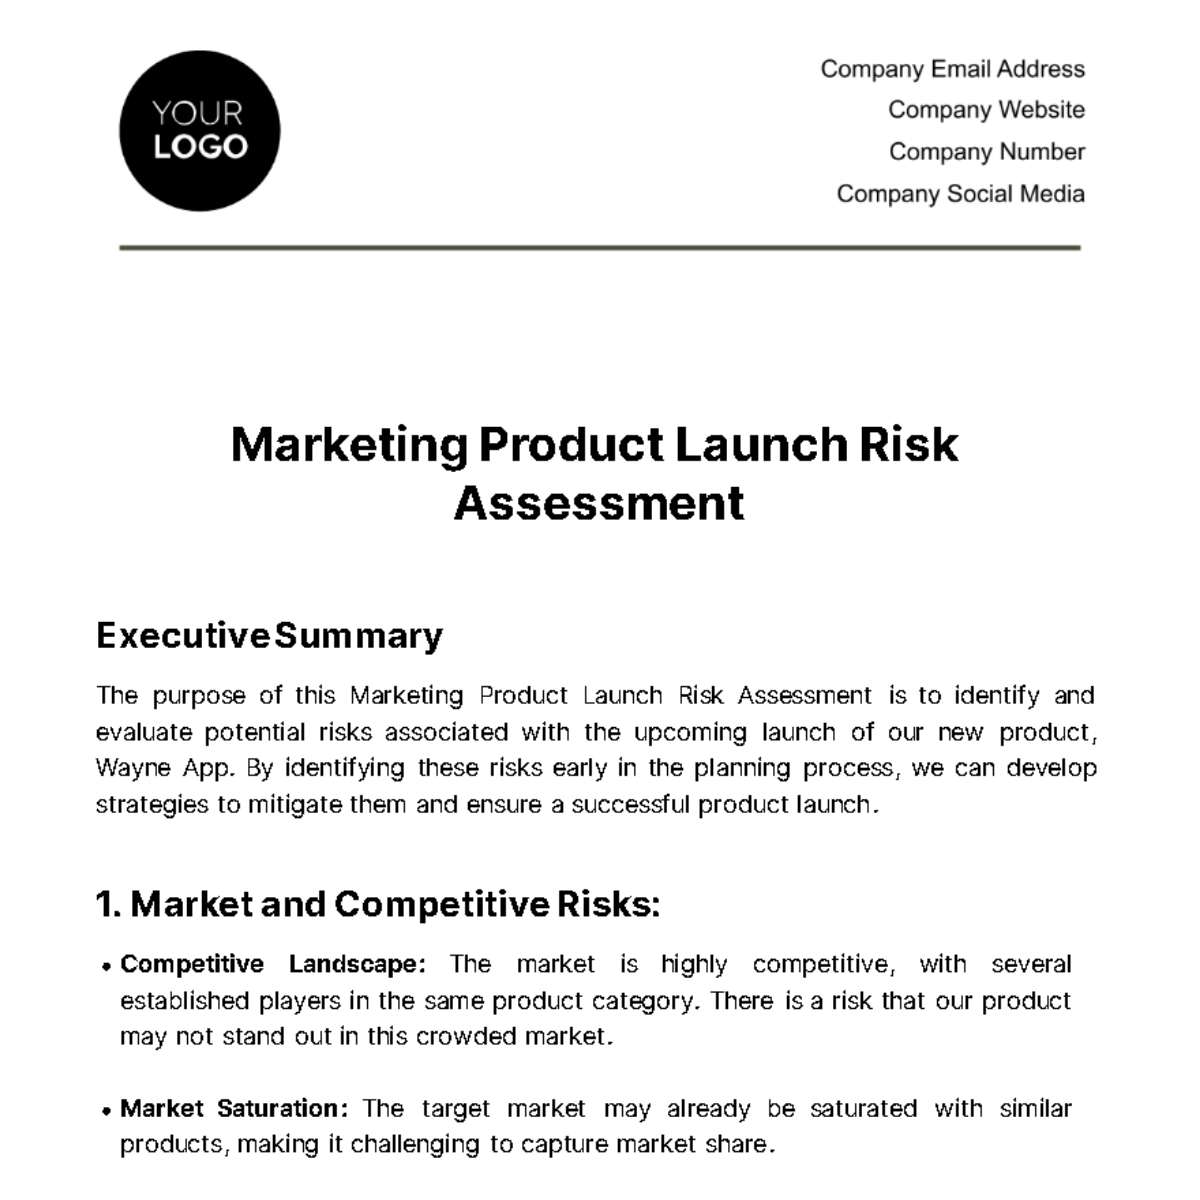 Marketing Product Launch Risk Assessment Template